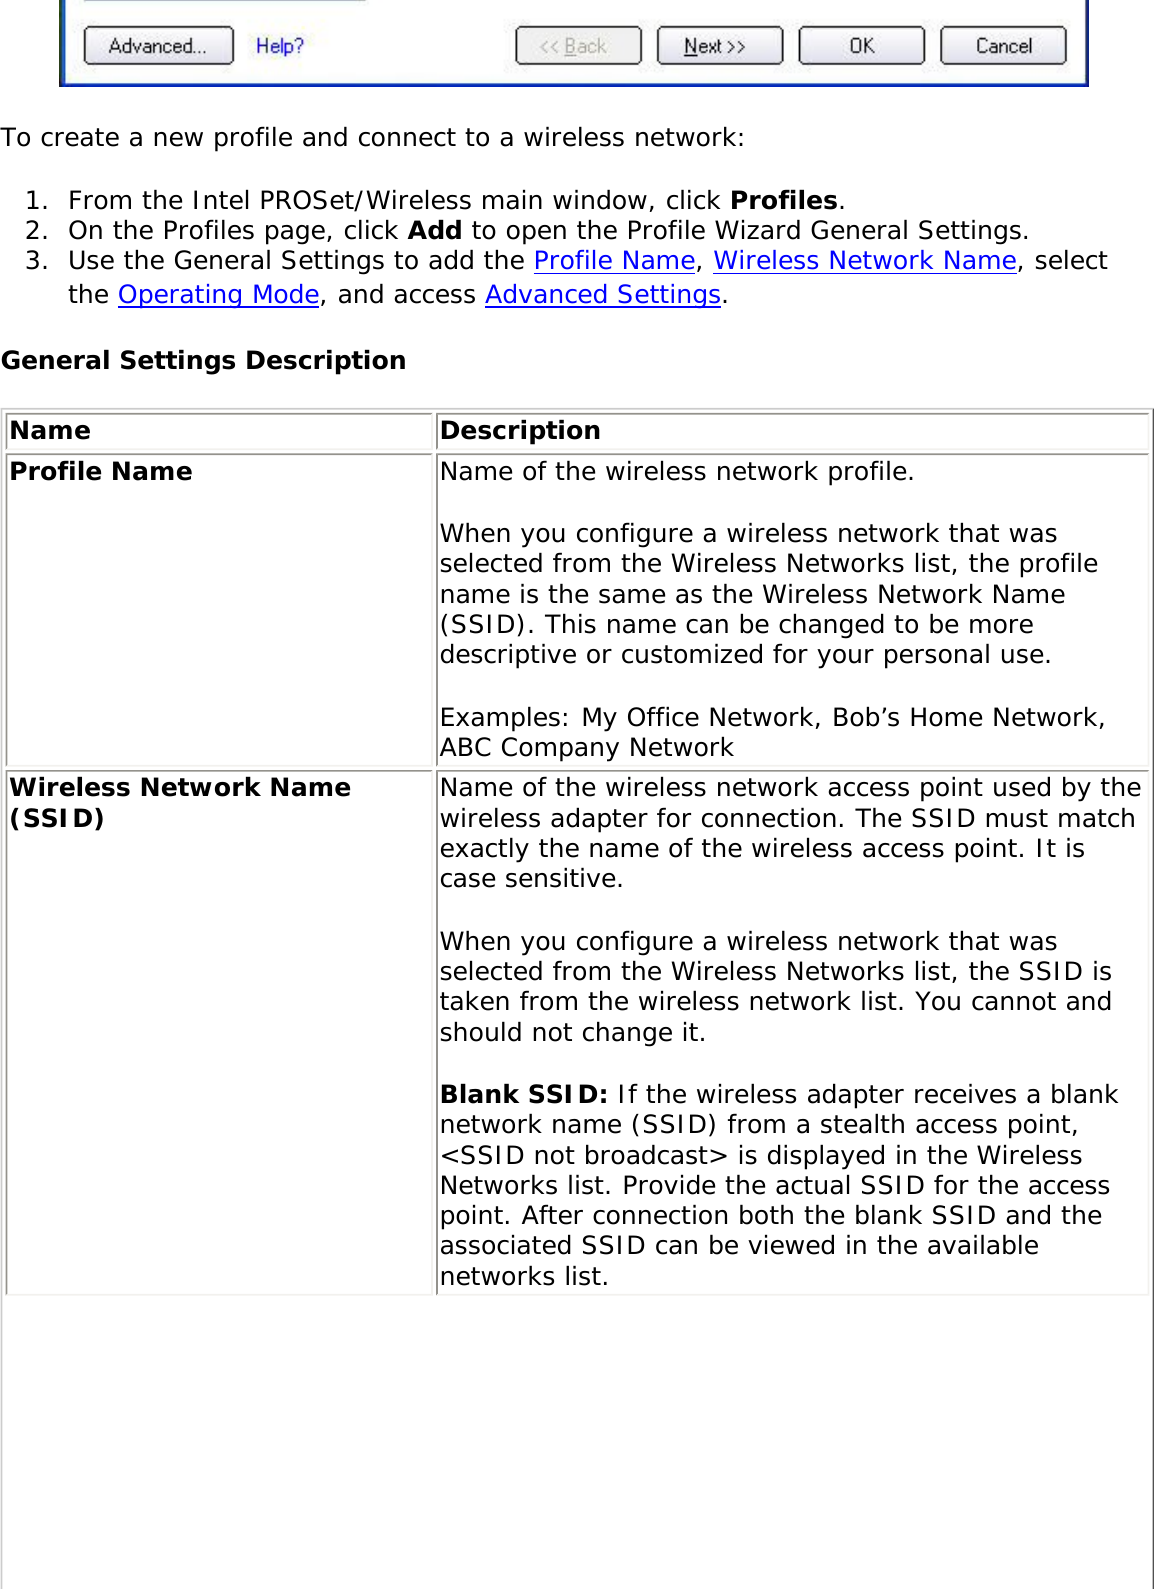  To create a new profile and connect to a wireless network: 1.  From the Intel PROSet/Wireless main window, click Profiles. 2.  On the Profiles page, click Add to open the Profile Wizard General Settings. 3.  Use the General Settings to add the Profile Name, Wireless Network Name, select the Operating Mode, and access Advanced Settings. General Settings DescriptionName DescriptionProfile Name Name of the wireless network profile. When you configure a wireless network that was selected from the Wireless Networks list, the profile name is the same as the Wireless Network Name (SSID). This name can be changed to be more descriptive or customized for your personal use. Examples: My Office Network, Bob’s Home Network, ABC Company NetworkWireless Network Name (SSID) Name of the wireless network access point used by the wireless adapter for connection. The SSID must match exactly the name of the wireless access point. It is case sensitive. When you configure a wireless network that was selected from the Wireless Networks list, the SSID is taken from the wireless network list. You cannot and should not change it. Blank SSID: If the wireless adapter receives a blank network name (SSID) from a stealth access point, &lt;SSID not broadcast&gt; is displayed in the Wireless Networks list. Provide the actual SSID for the access point. After connection both the blank SSID and the associated SSID can be viewed in the available networks list.